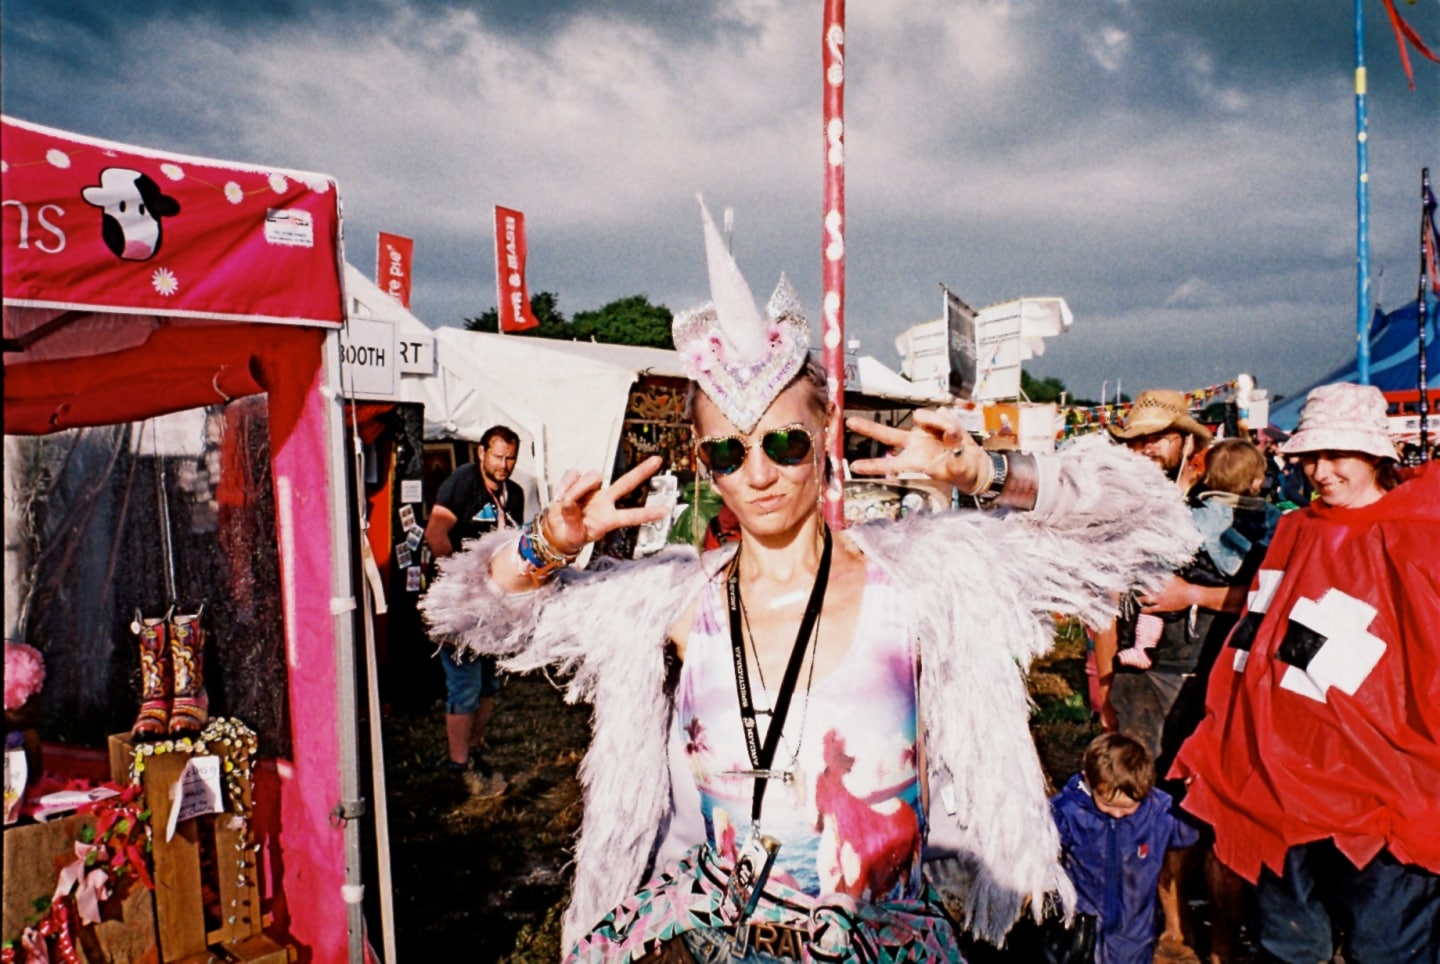 25 Kooky Festival Looks From Glastonbury To Copy This Summer